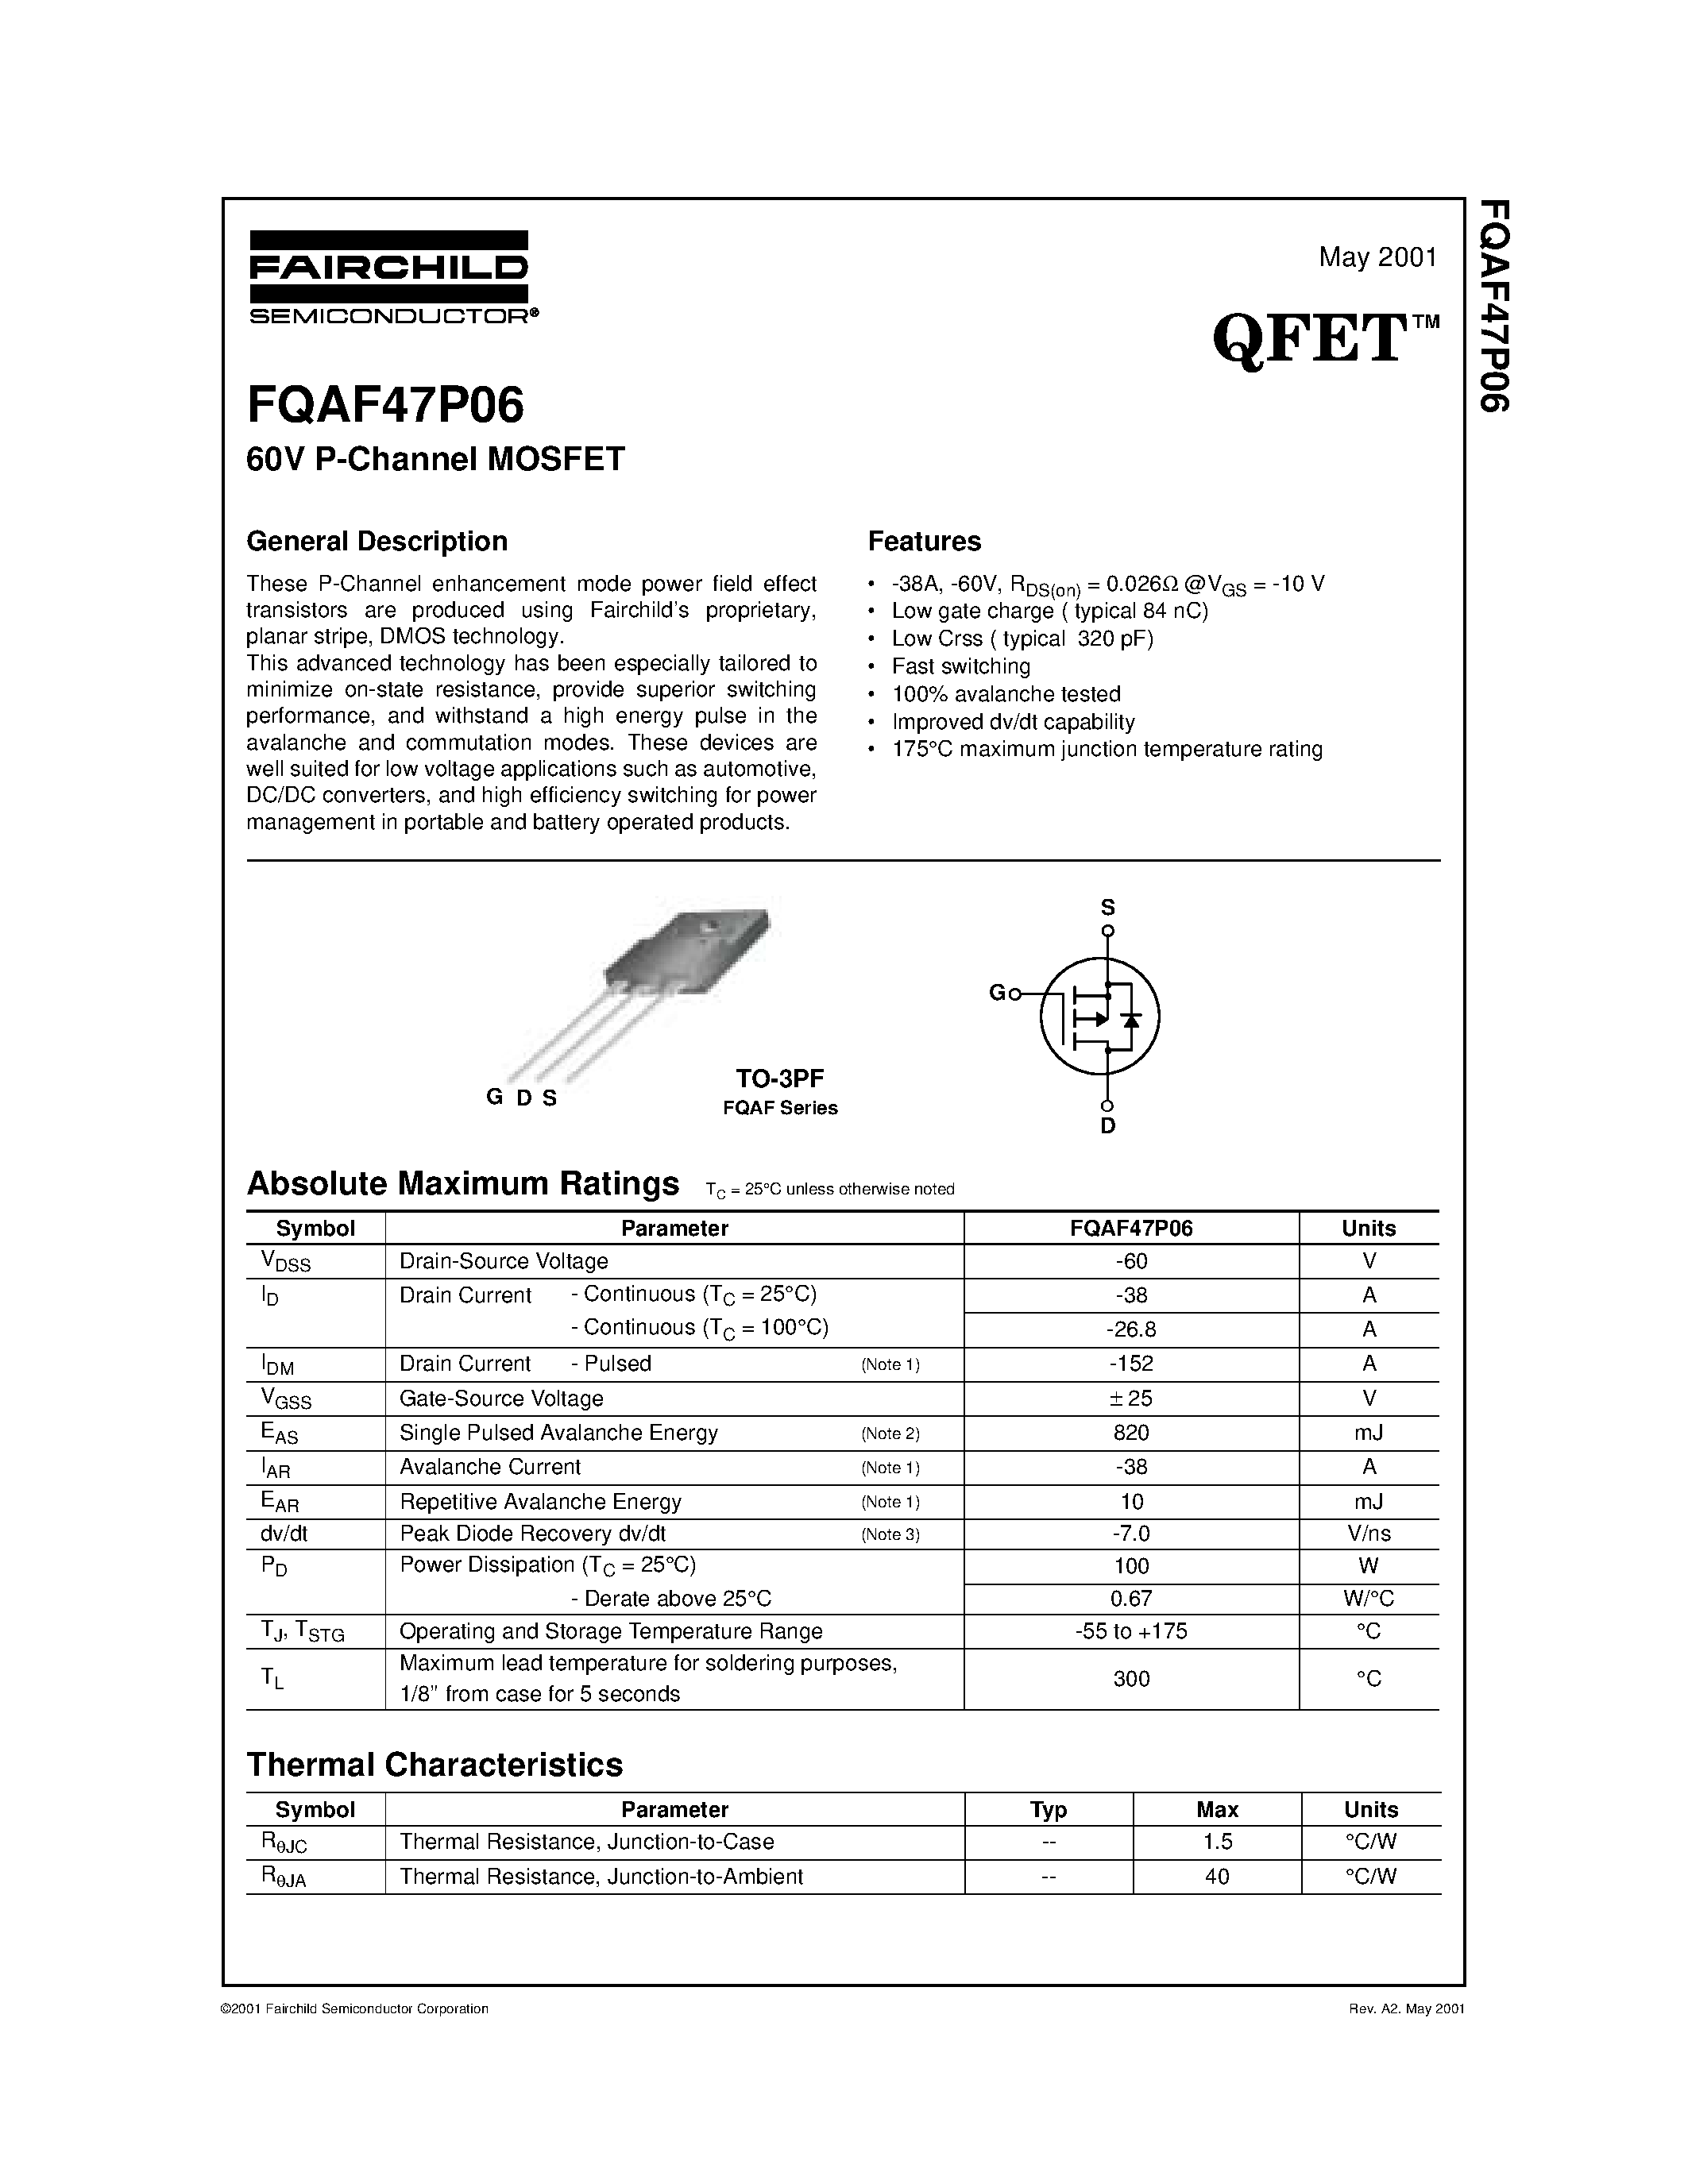 Datasheet FQAF47P06 - 60V P-Channel MOSFET page 1